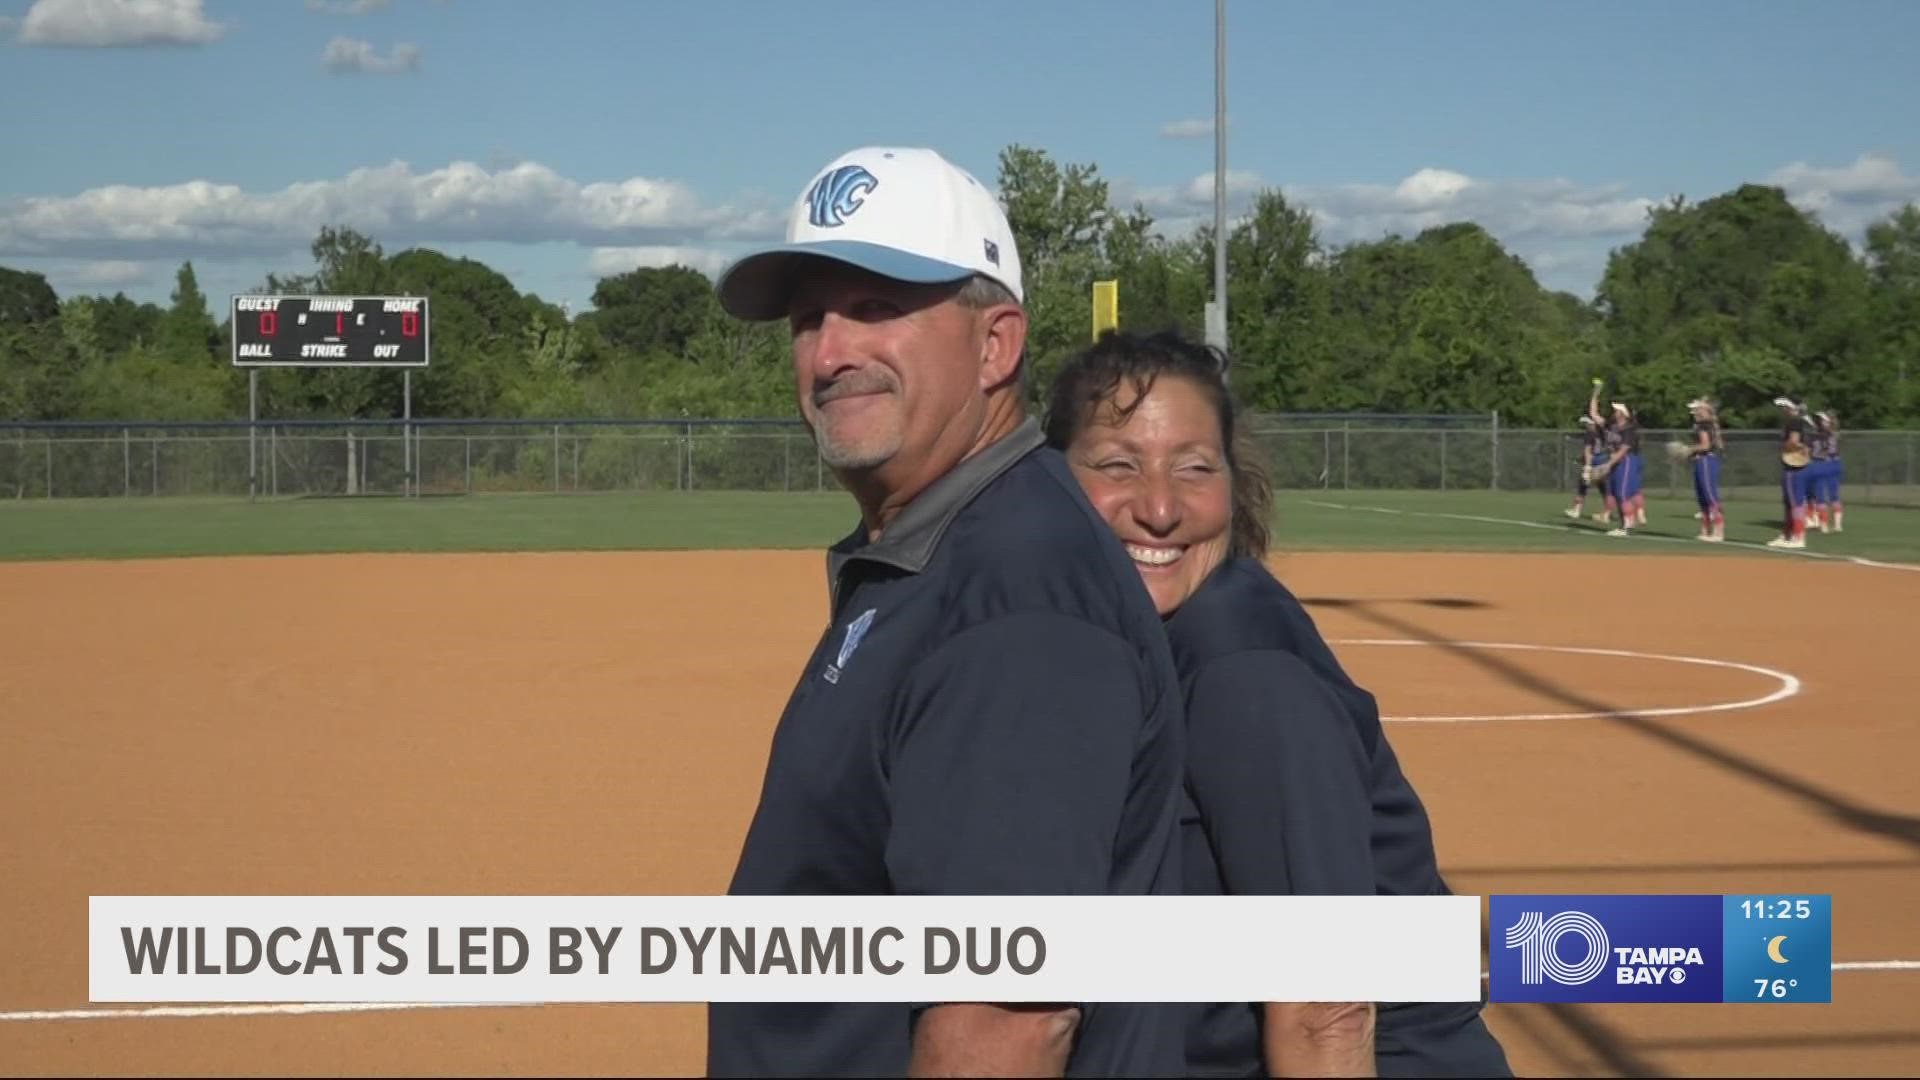 Nelson Garcia left coaching in 2019 to focus on his health. He returned in 2021 and, alongside his wife, has led Wesley Chapel to its first district championship.